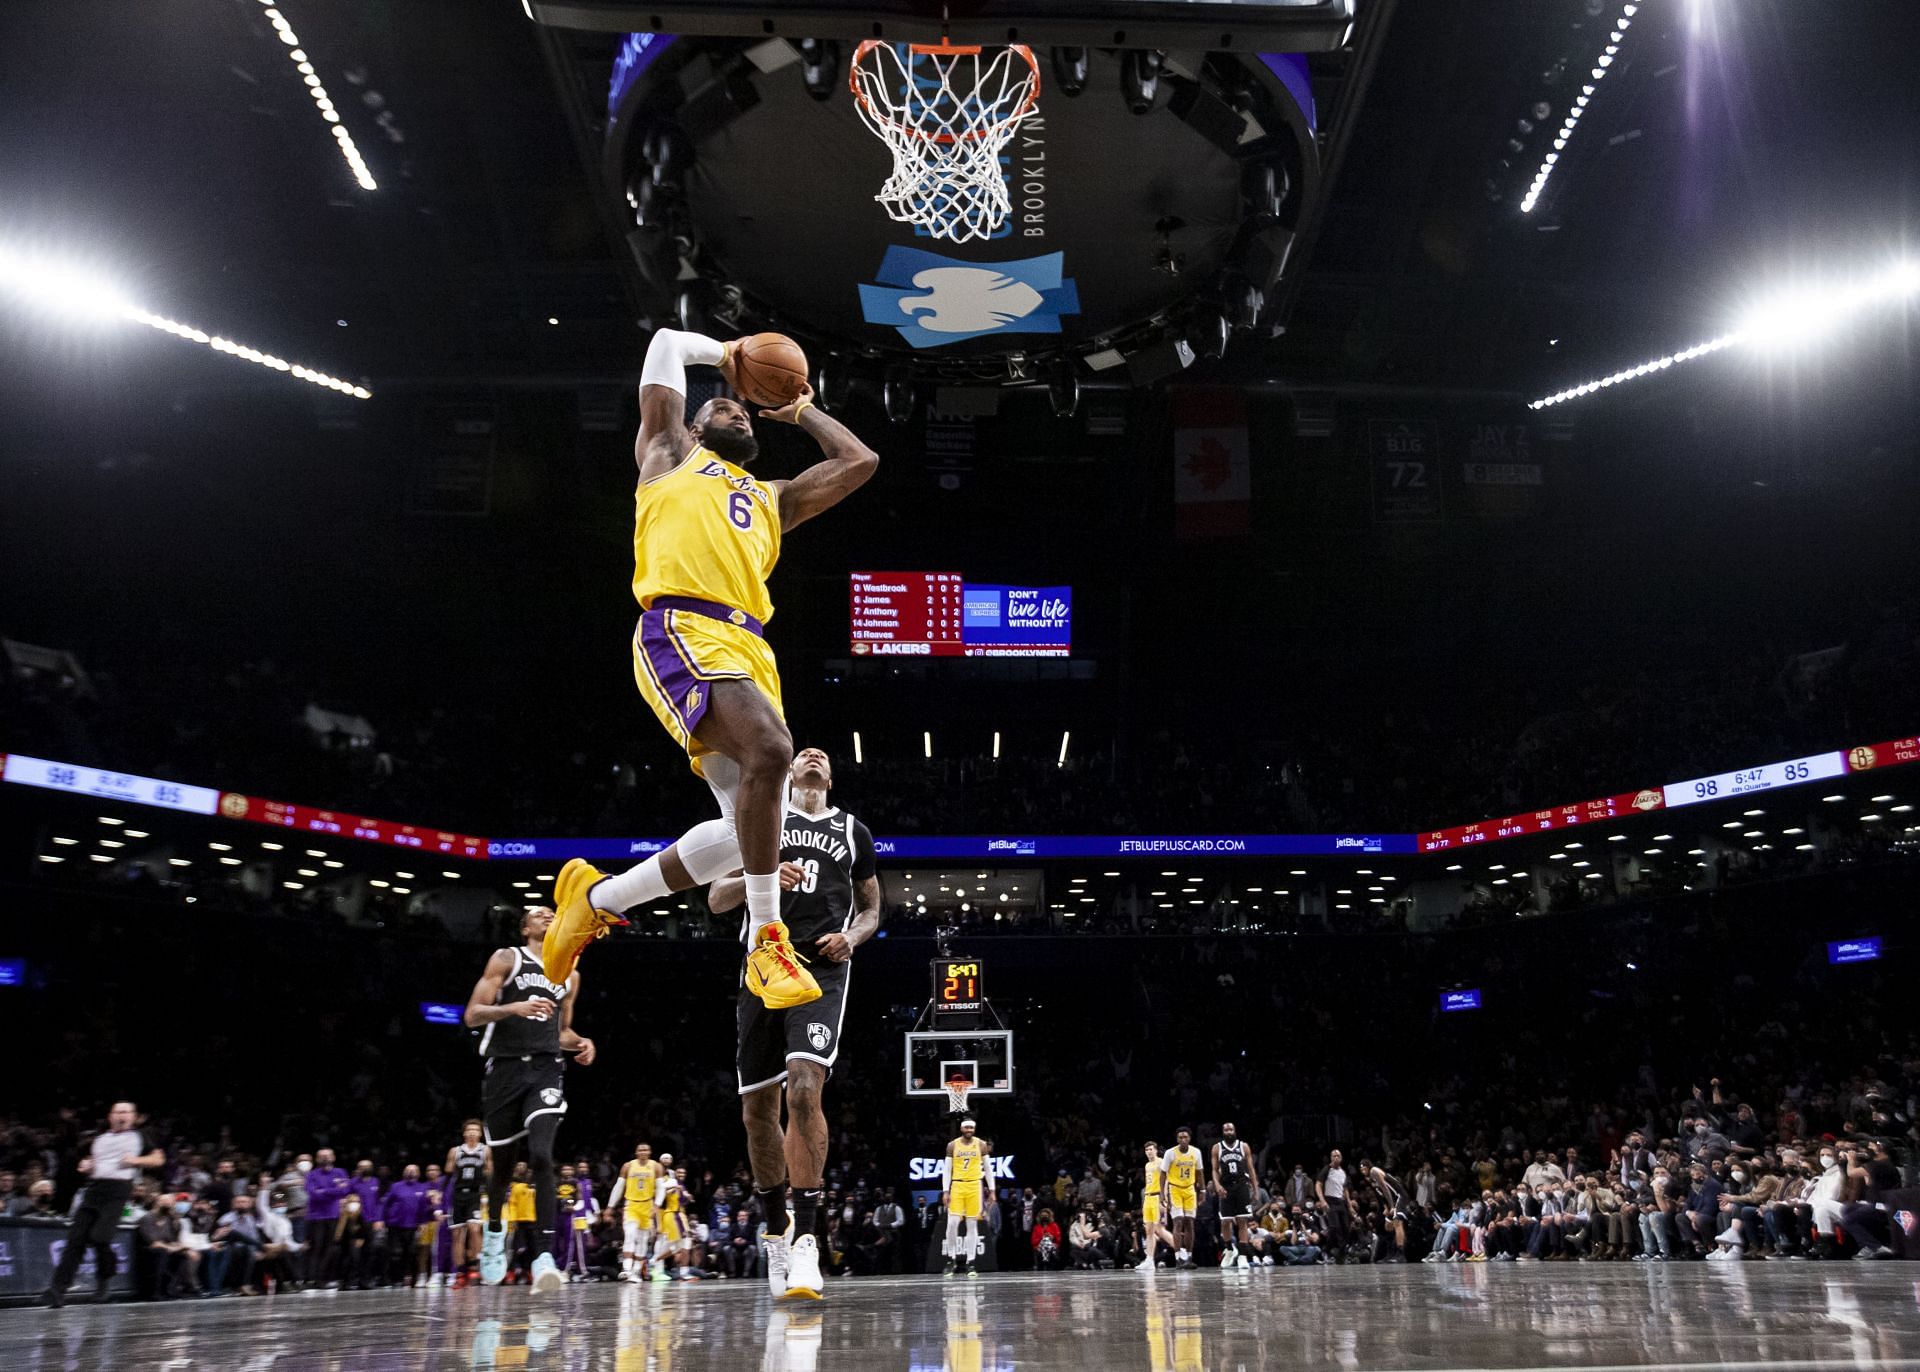 LeBron James with a fabulous dunk for the LA Lakers against the Brooklyn Nets